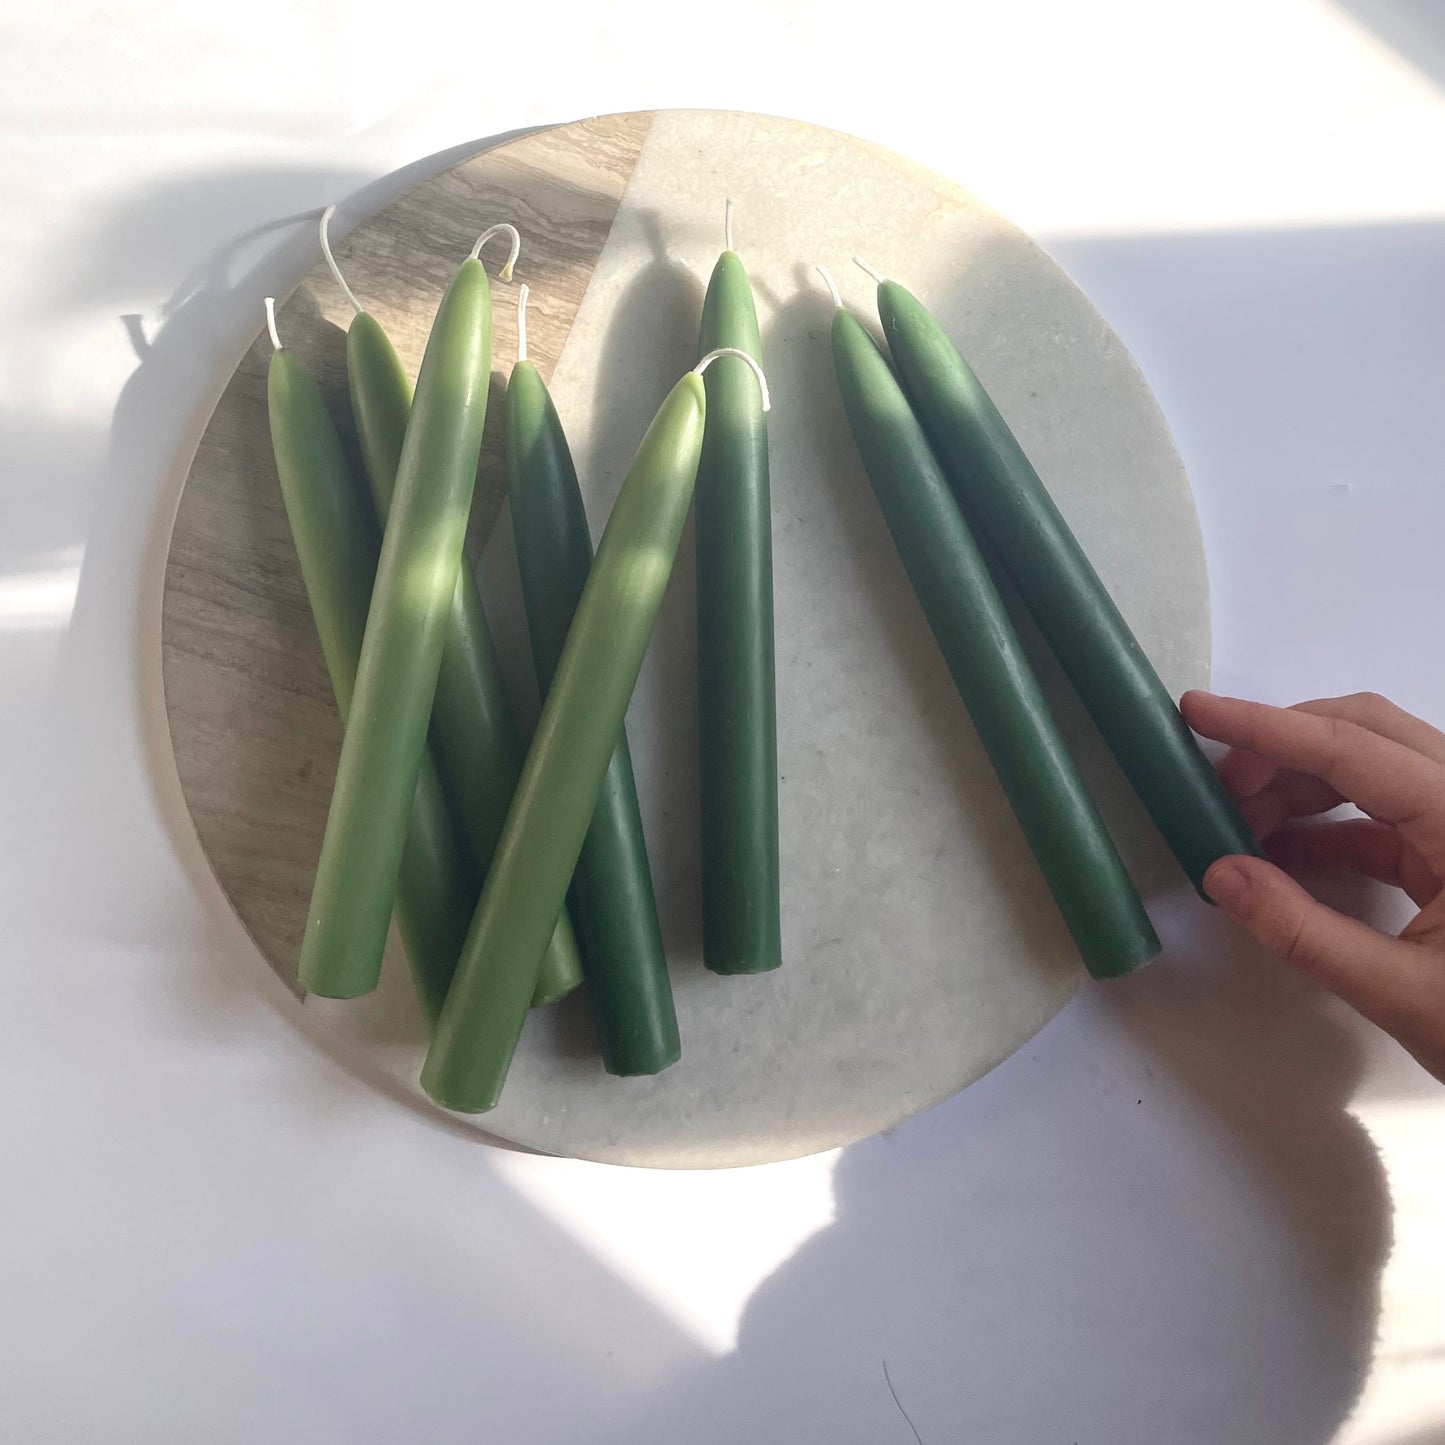 Green Beeswax Taper Candles, Pair of 2 // Tapers, Beeswax Candles, 8" Tapers, Eco Friendly, Candles